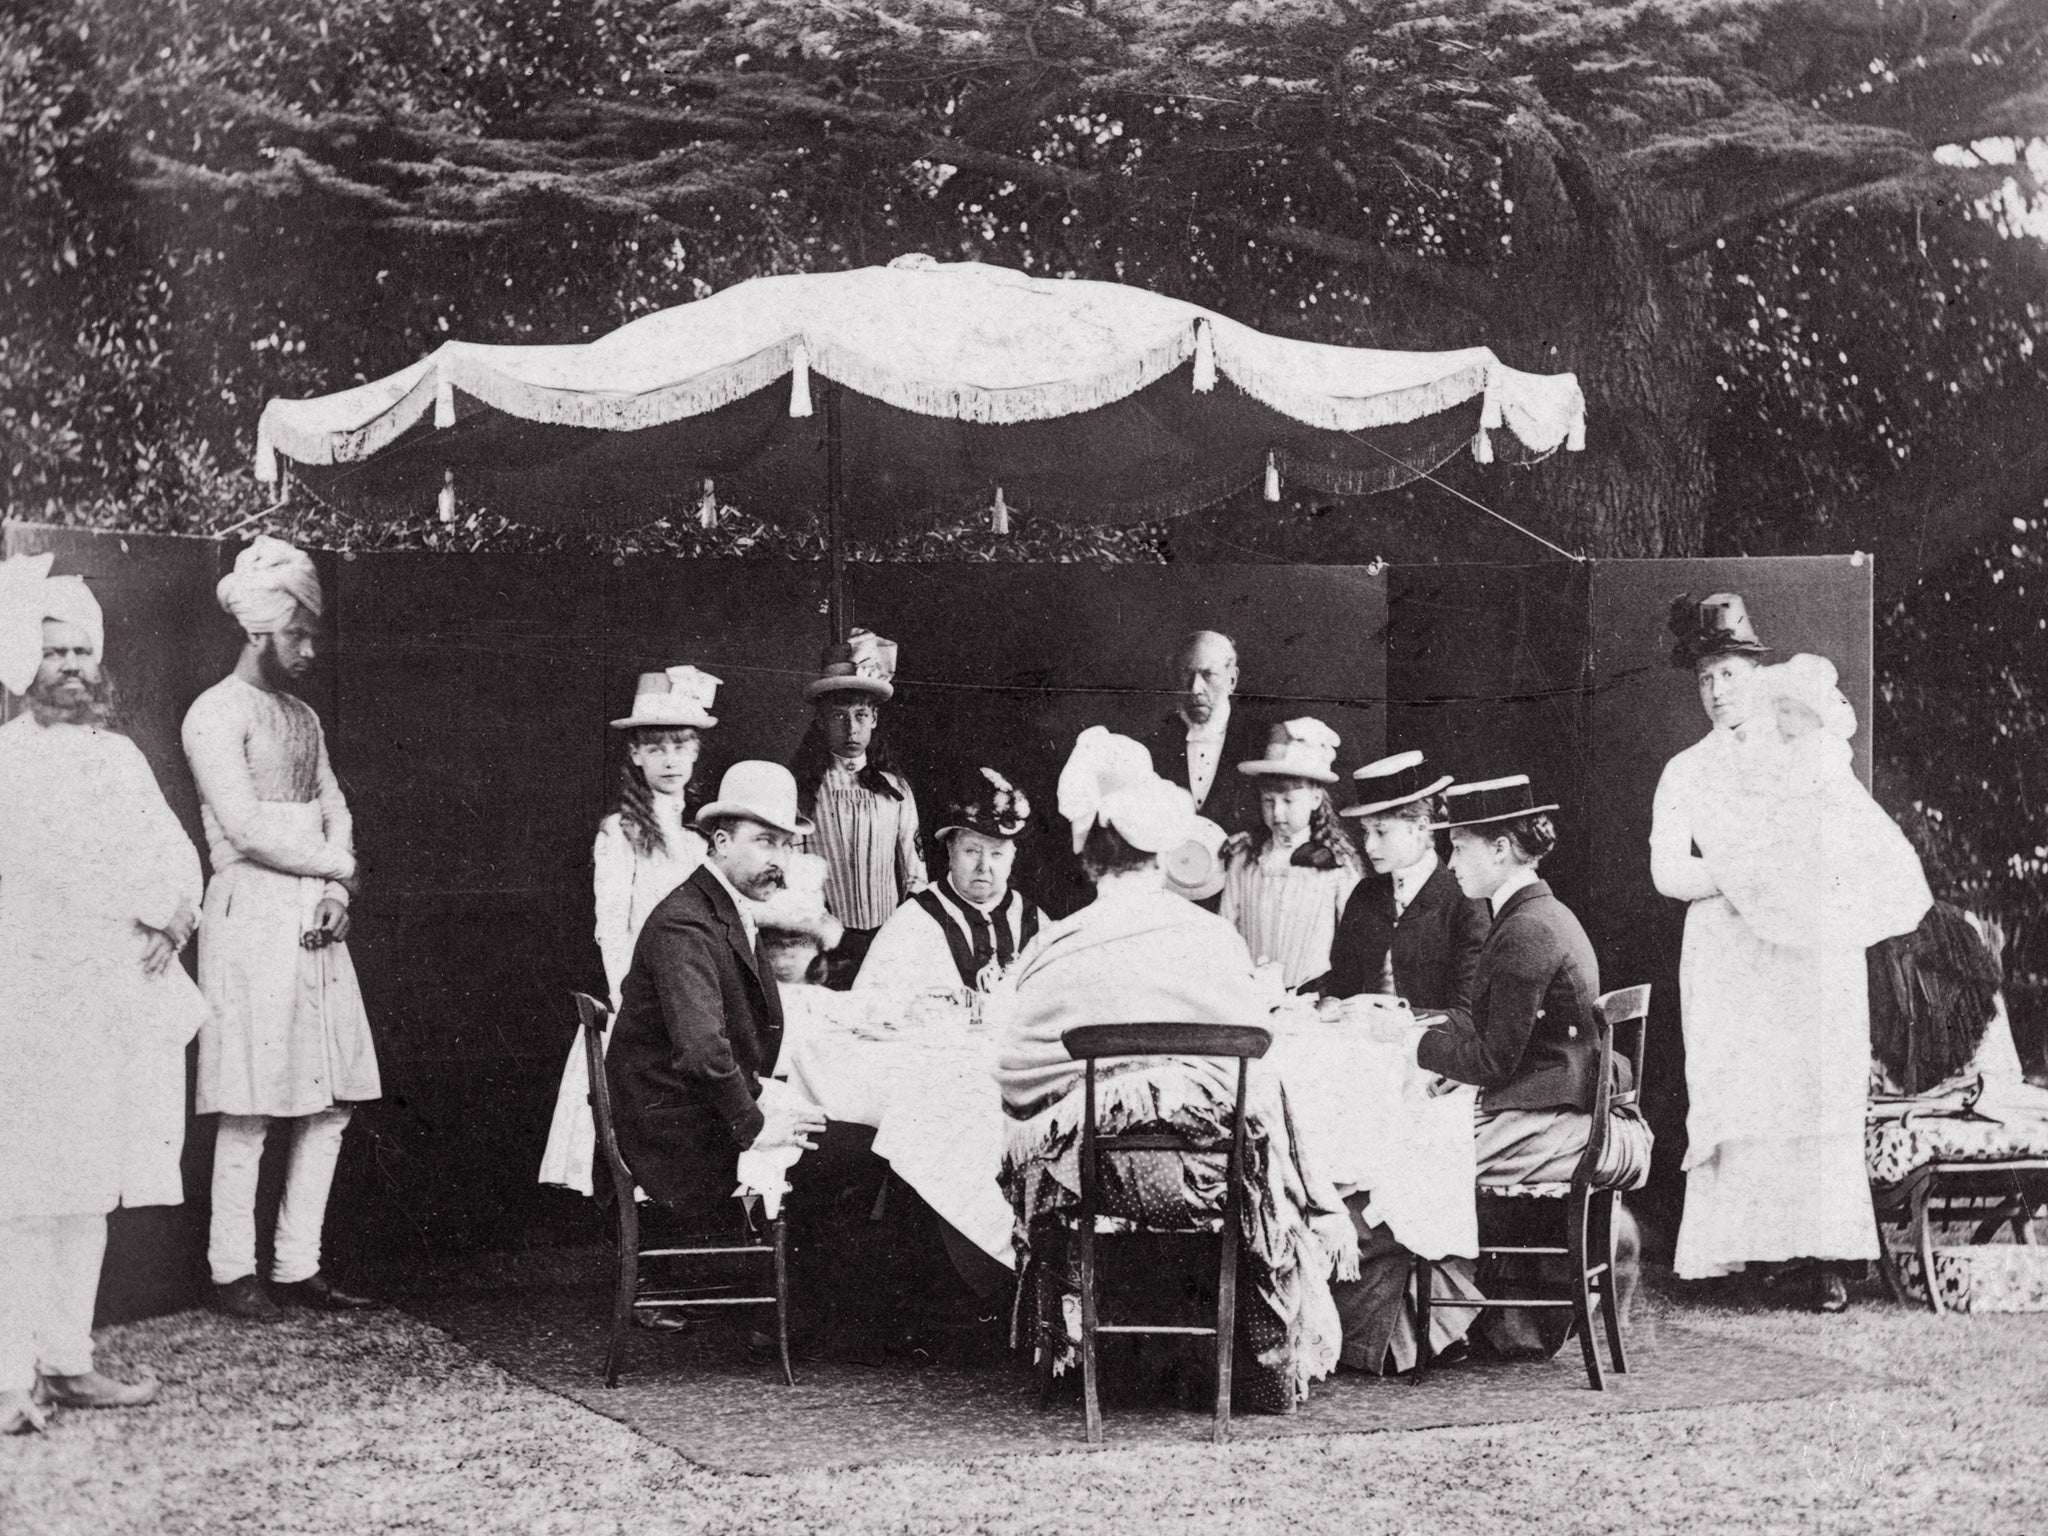 Indian summer: Queen Victoria at a family garden party at Osborne House on the Isle of Wight, with Indian servants